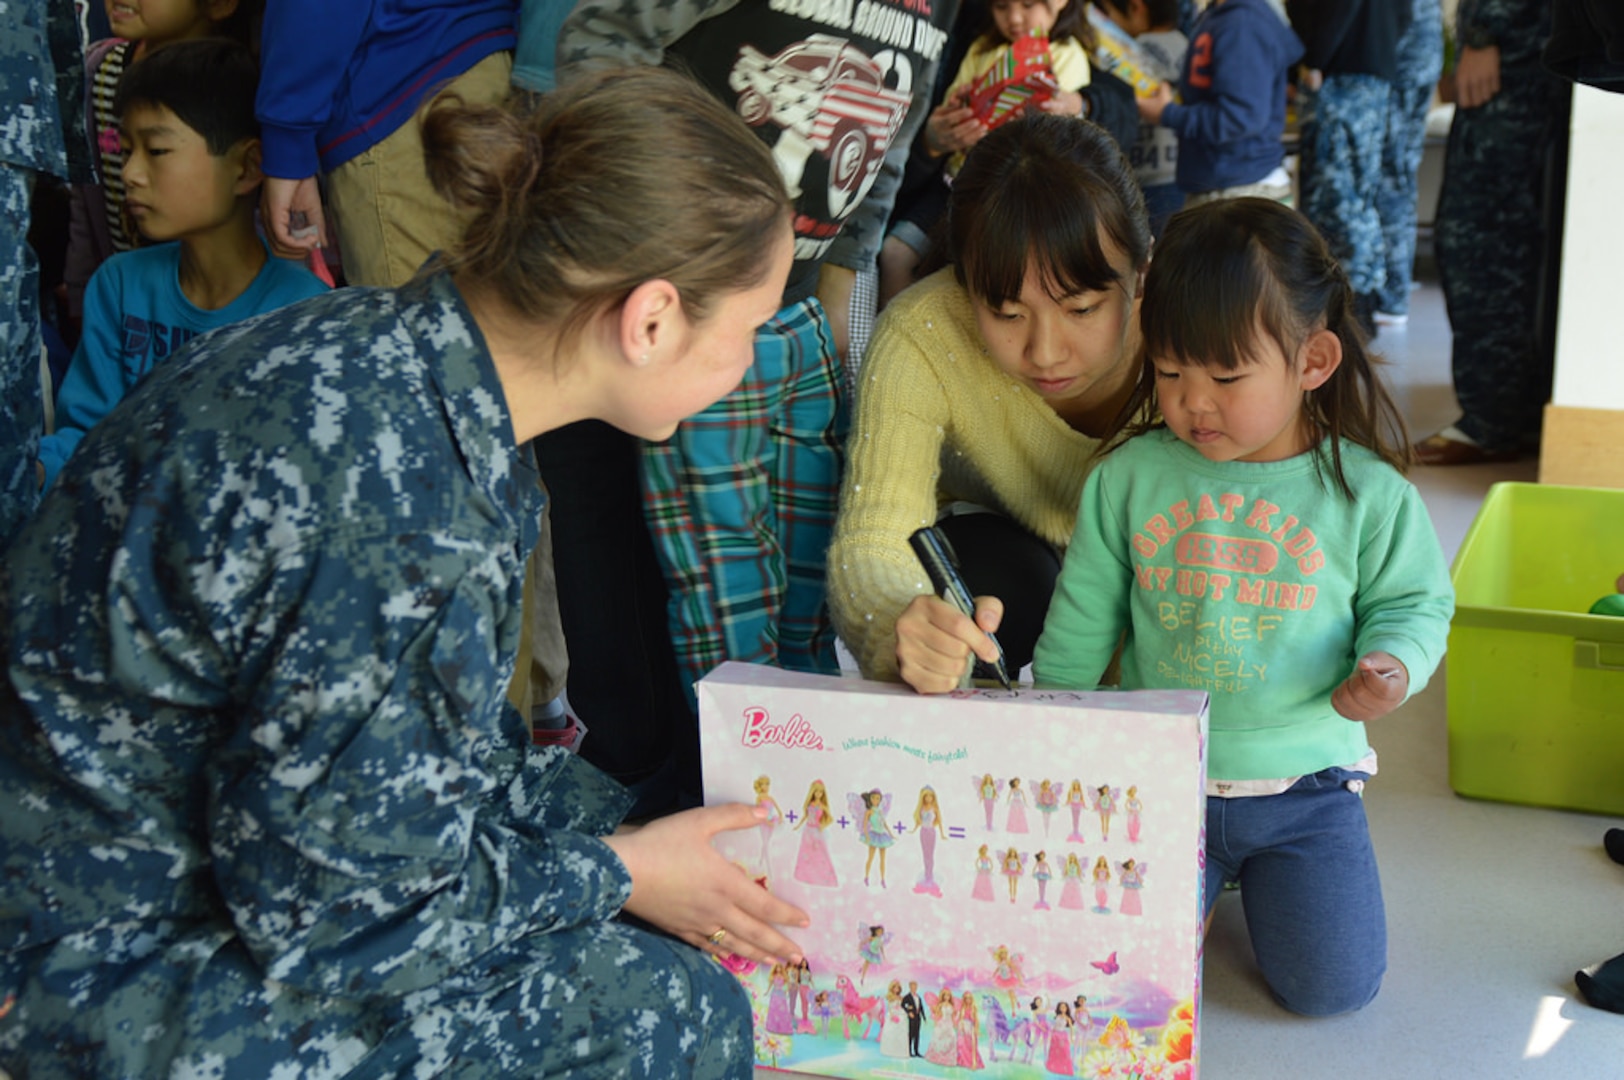 YOKOSUKA, Japan (Dec. 6, 2014) - Intelligence Specialist Seaman Amy Graham, from U.S. 7th Fleet flagship USS Blue Ridge (LCC 19), shares a gift with a local child from Shunkouen Spring Bright Garden Orphanage during a community relations (COMREL) event. Blue Ridge COMRELs strengthen relations promoting peace, stability and our commitment to our local communities. 141206-N-KG618-040
